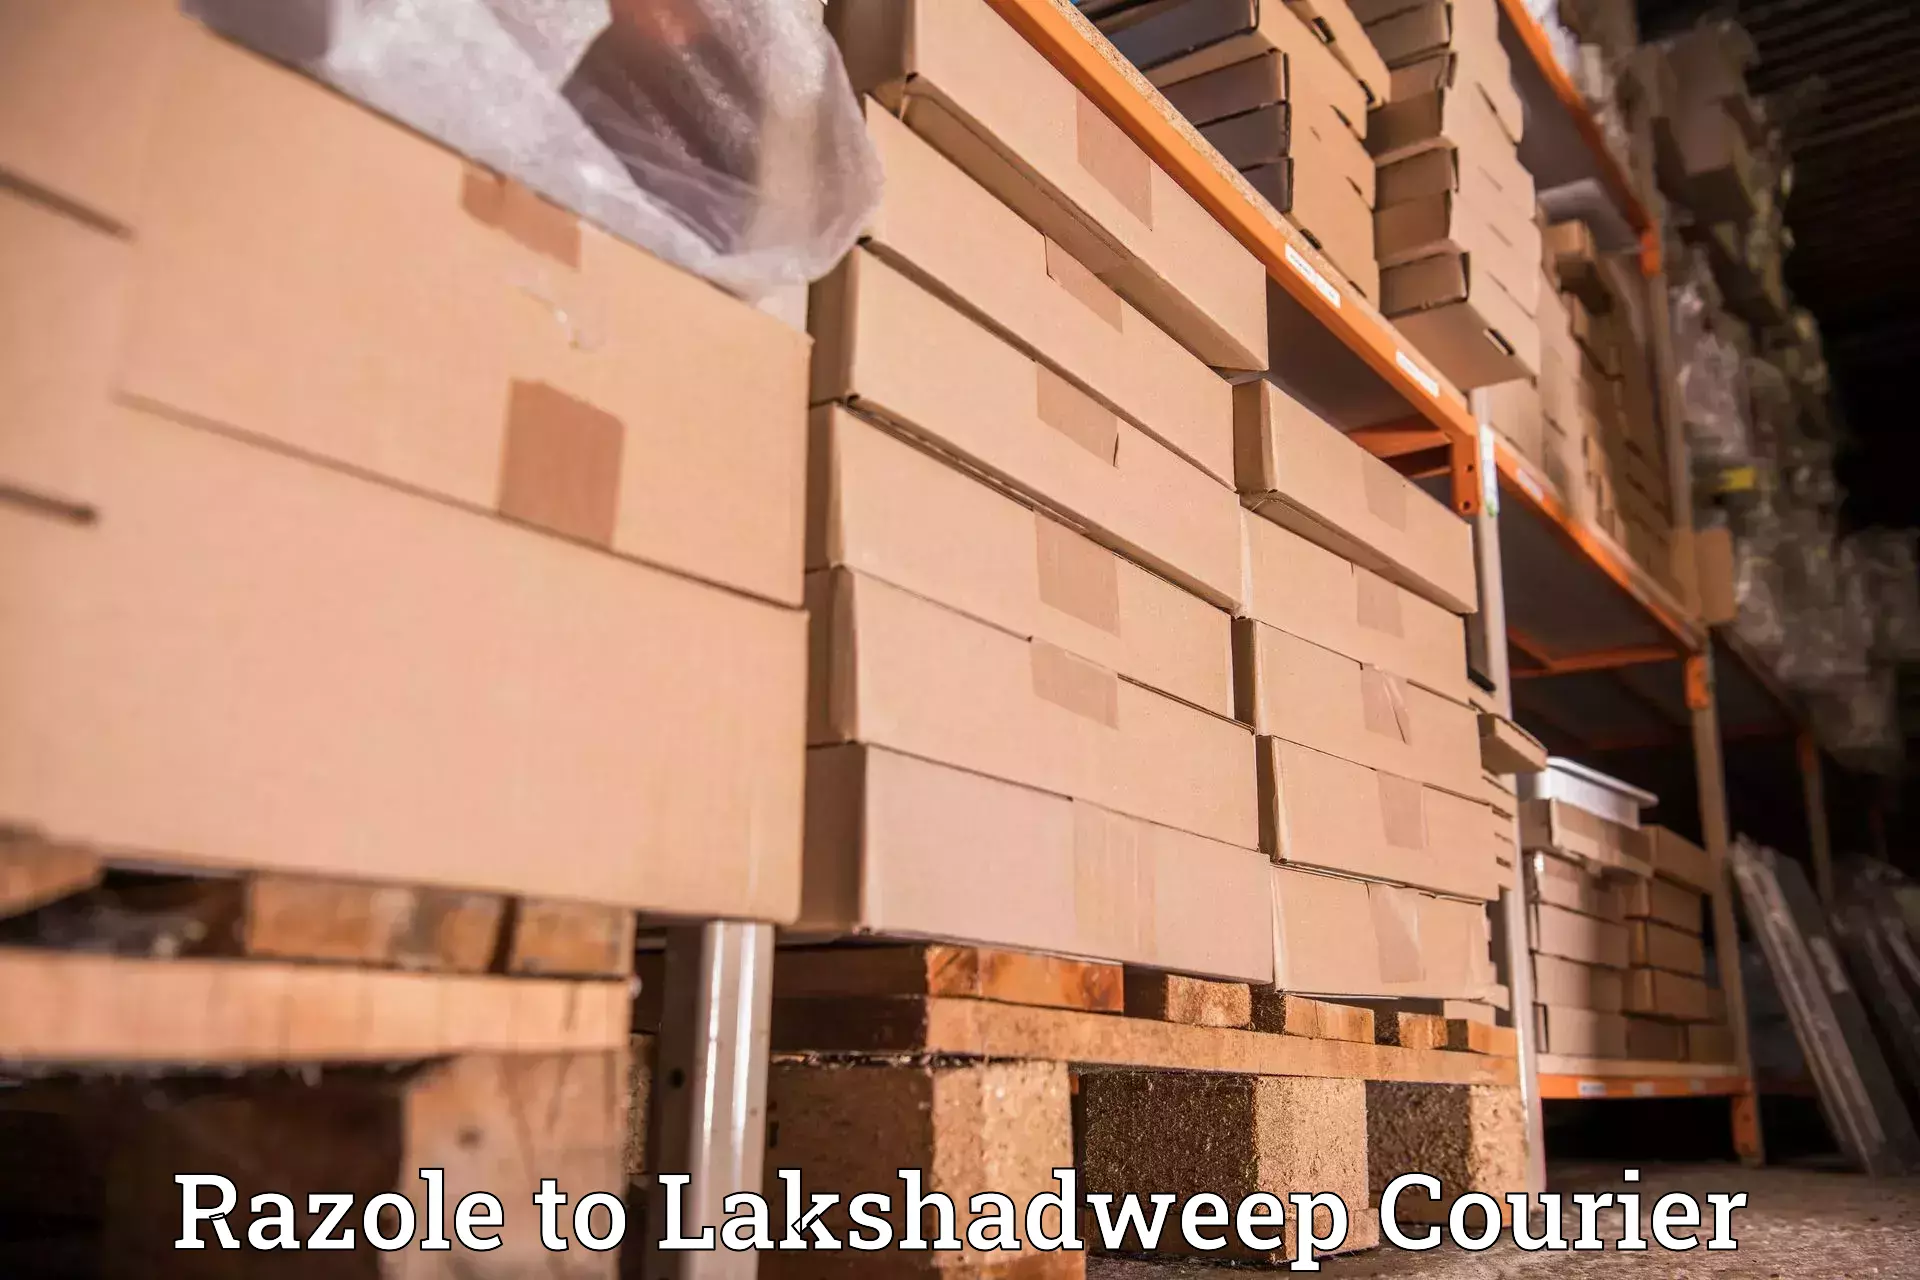 Courier dispatch services in Razole to Lakshadweep